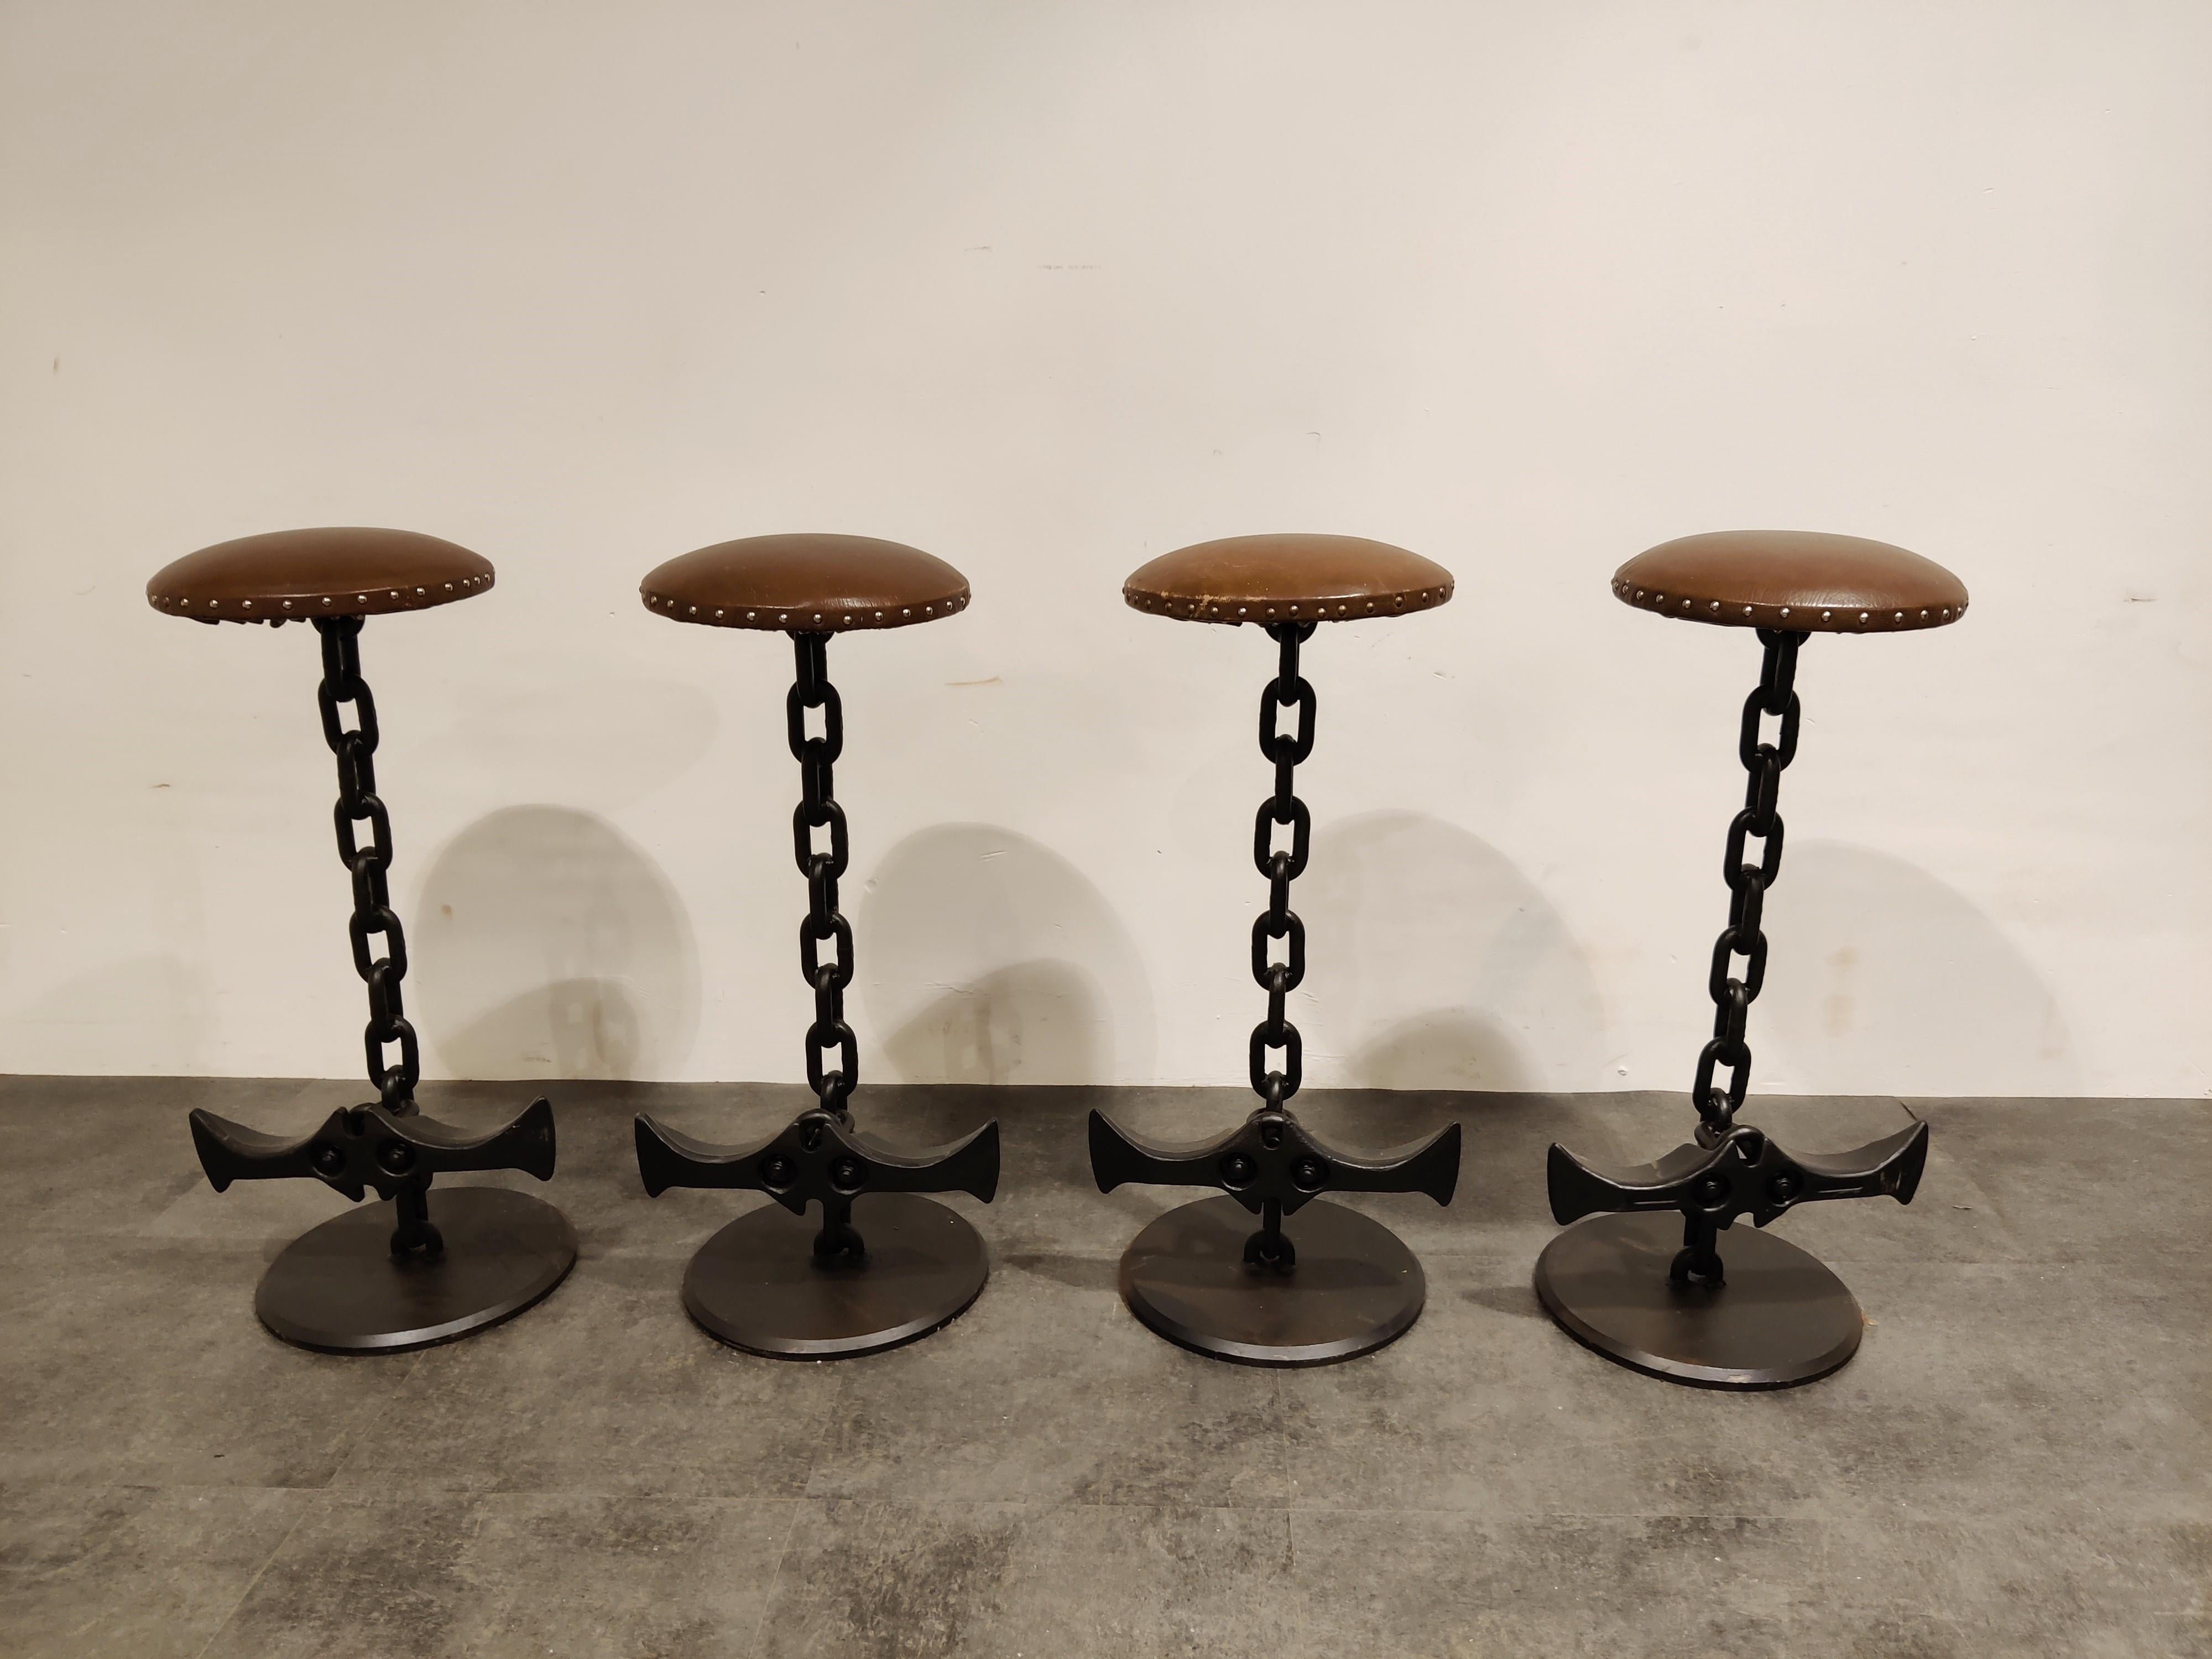 Inventive Brutalist bar stools made from solid metal chain links and brown leather seats.

Needless to say, these bar stools are very robuste and have a nice industrial look to them.

They are made from chains which where used in coal mines, the